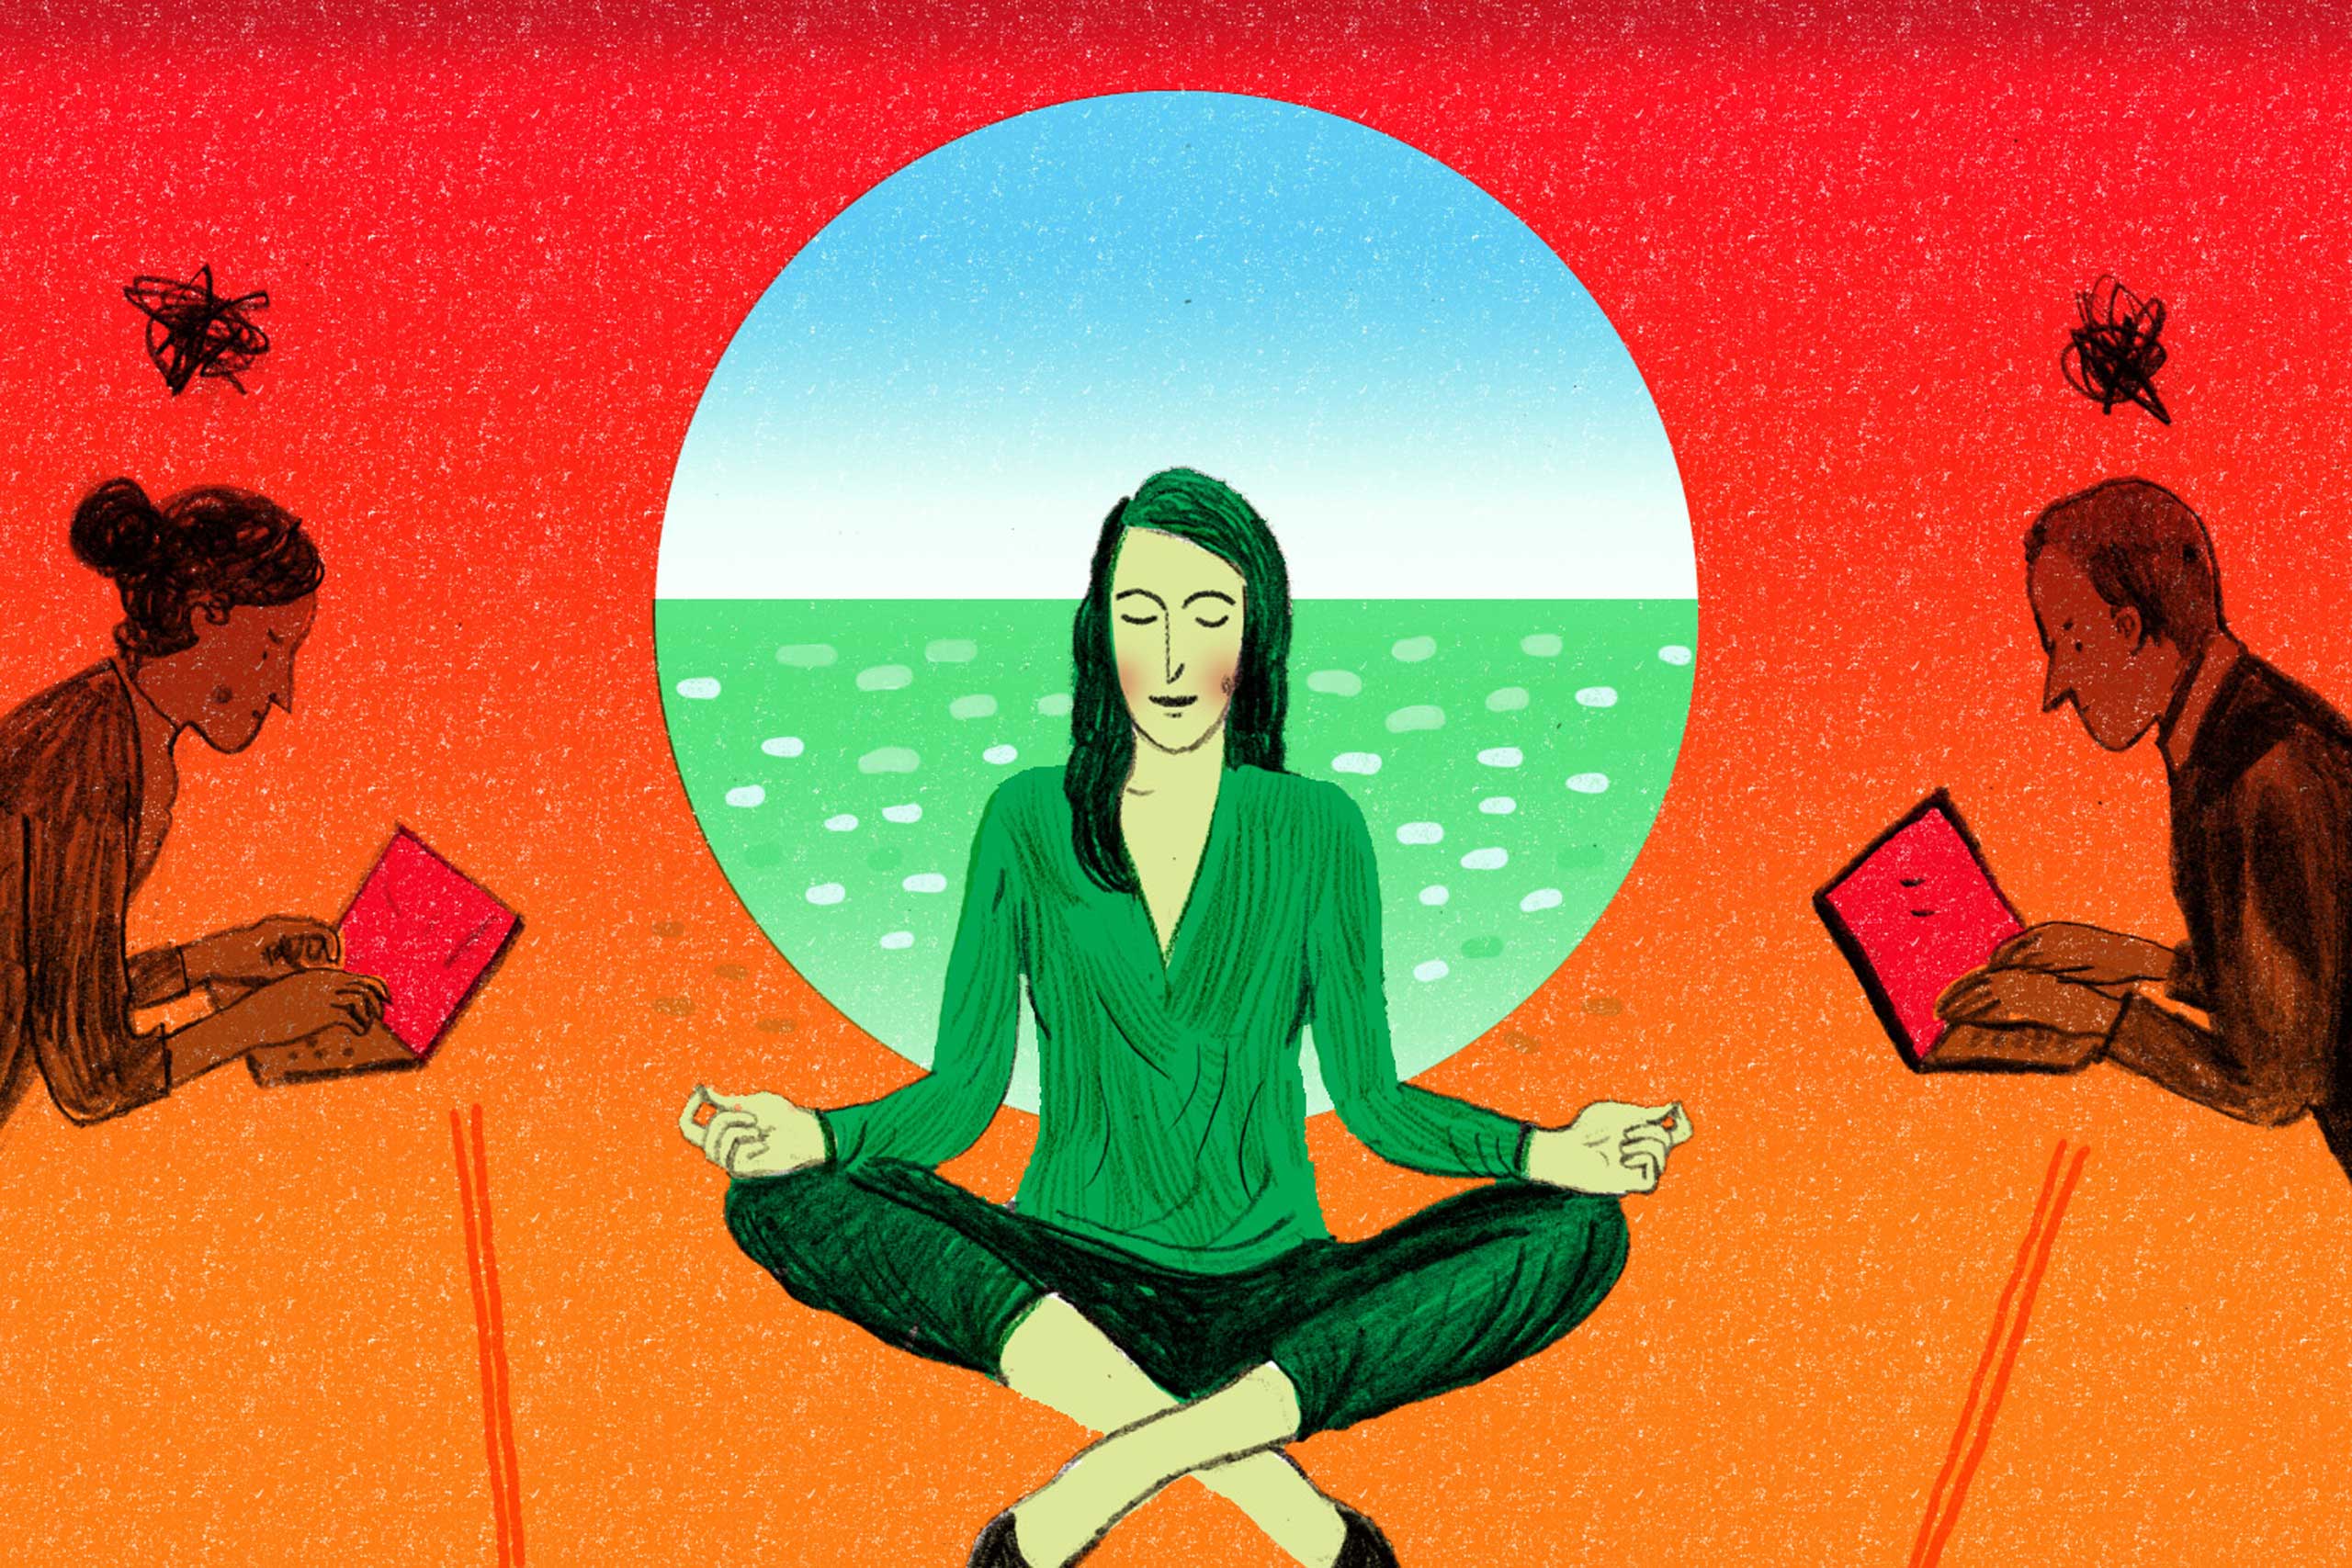 <strong><a href="http://time.com/3479384/meditation-benefits/" target="_blank">You Asked: Is Meditation Really Worth It?</a></strong>
                      From easing stress to lowering heart disease risk, focusing your mind can do some amazing things for your body. (Illustration by Peter Oumanski for TIME)